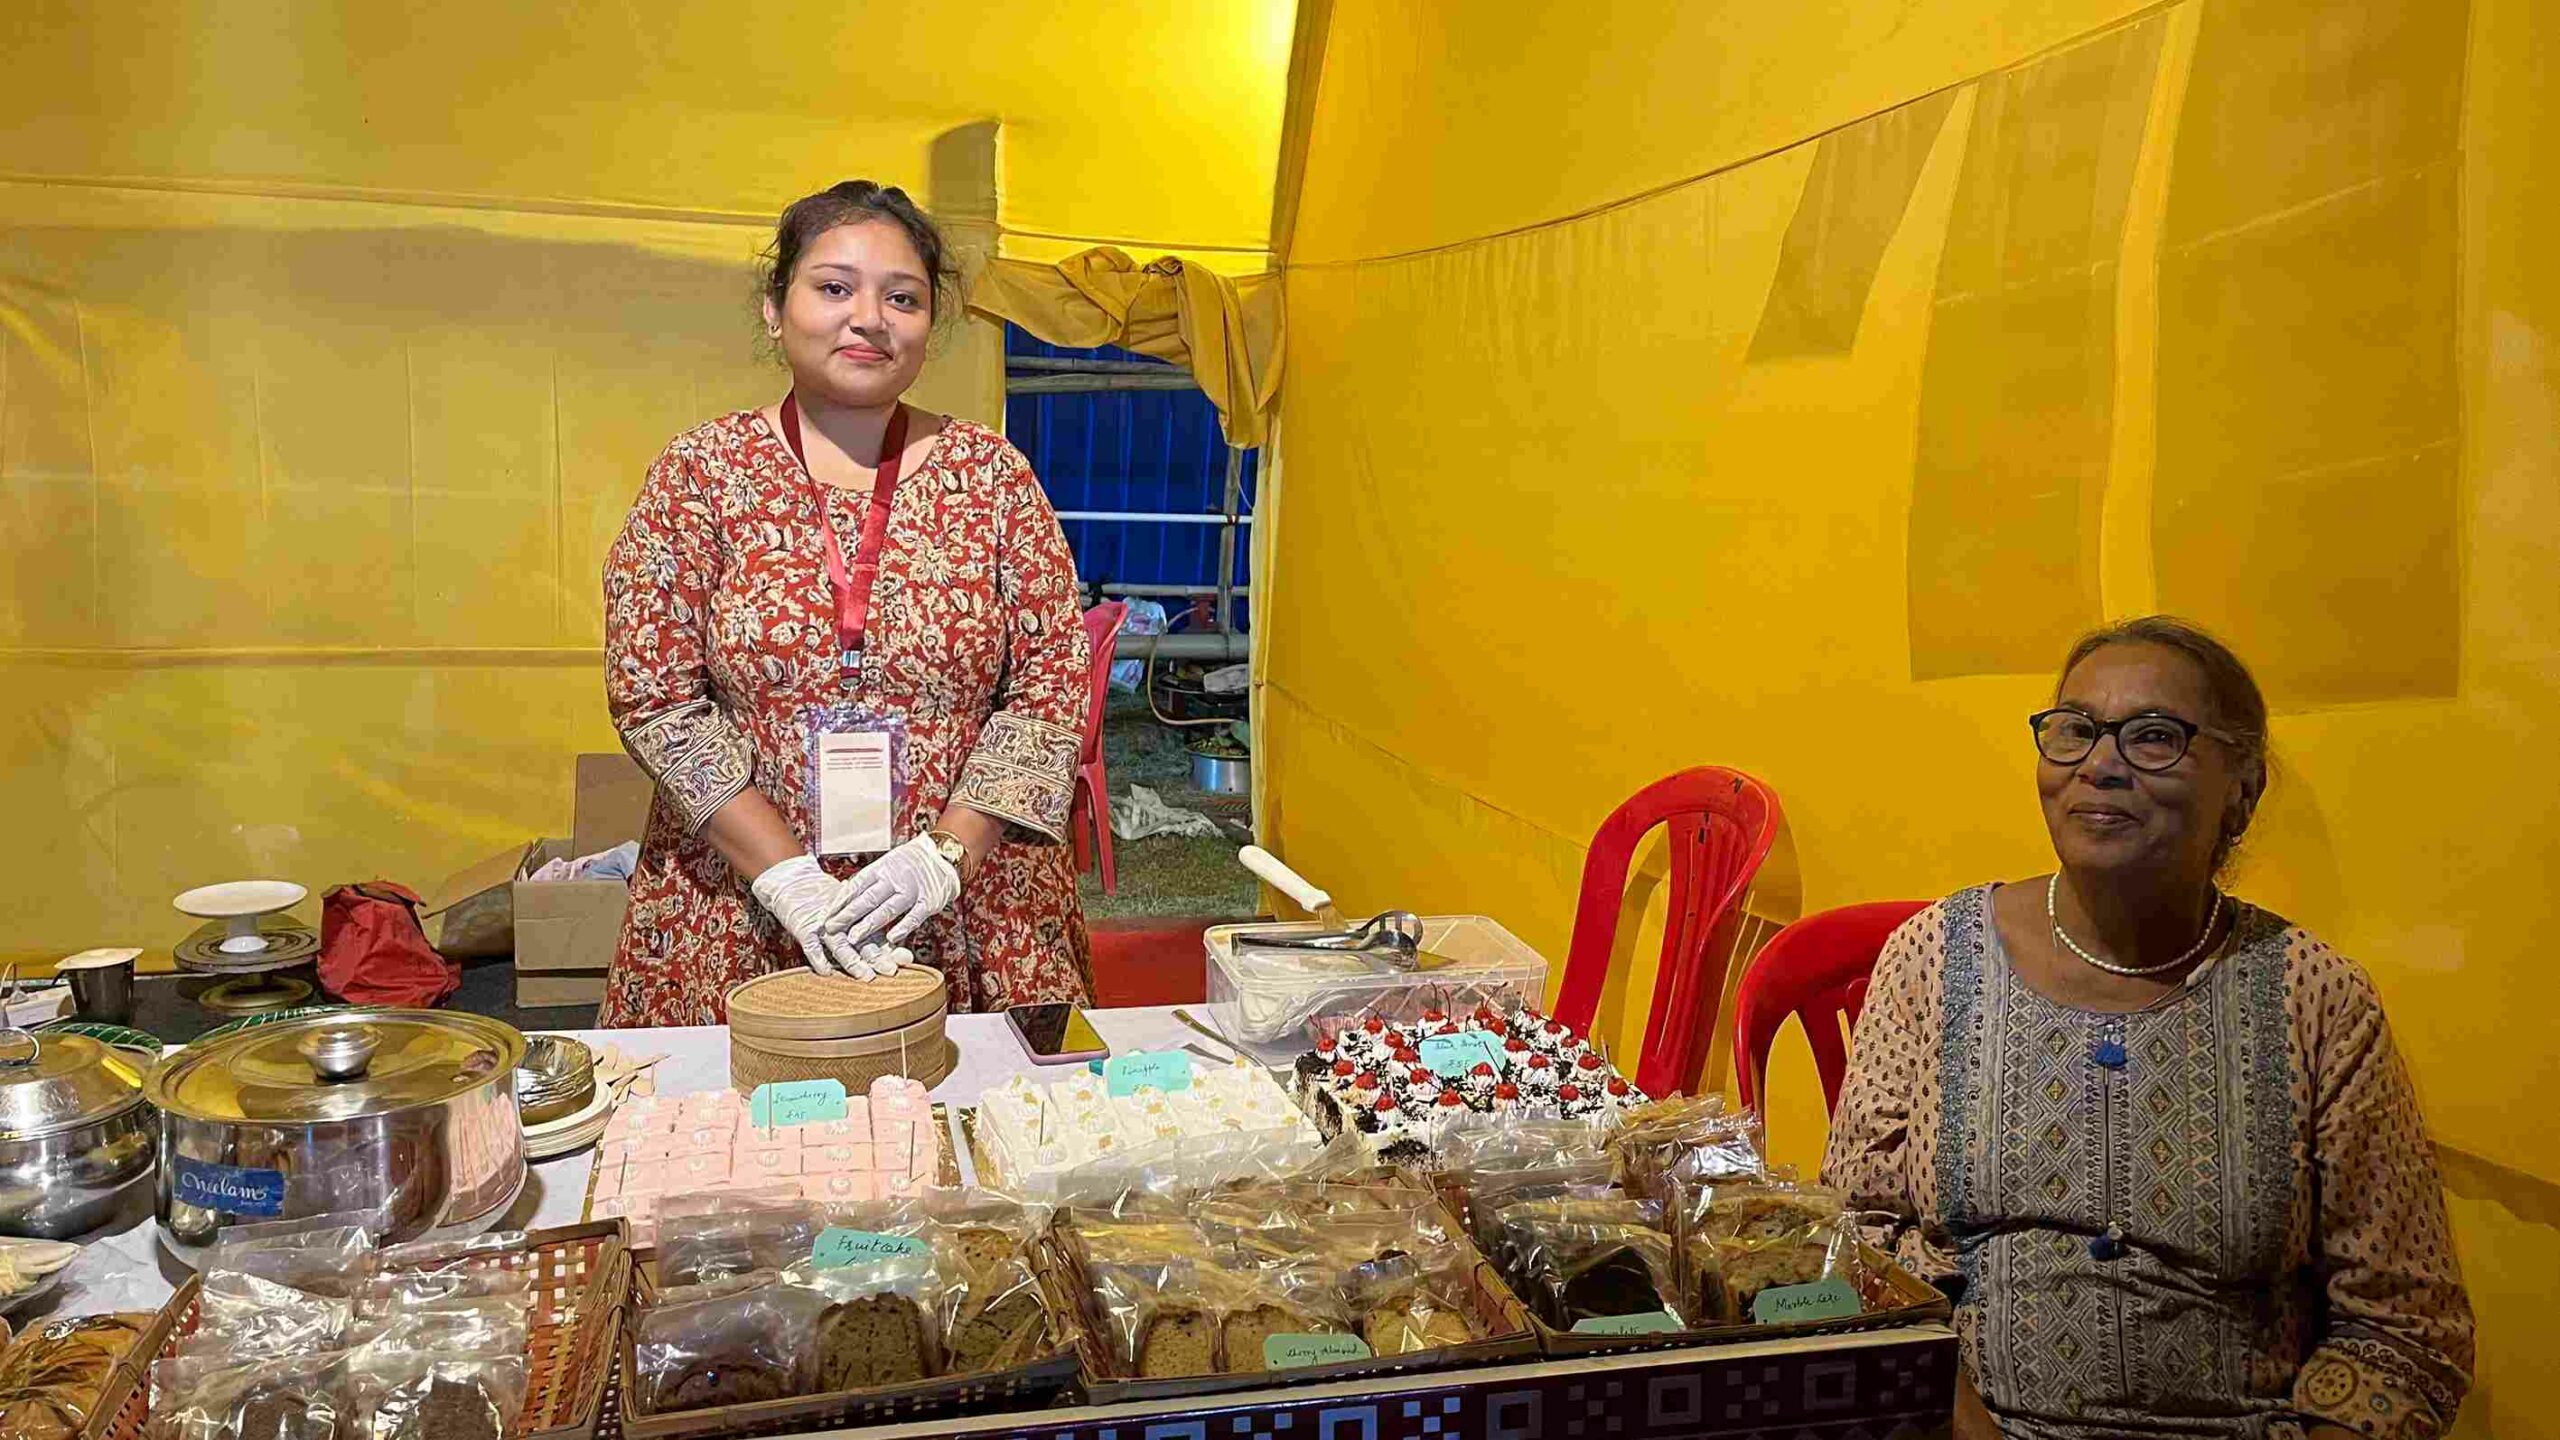 Participants displaying the popular food items from their tribal communities at the stalls in Samvaad.